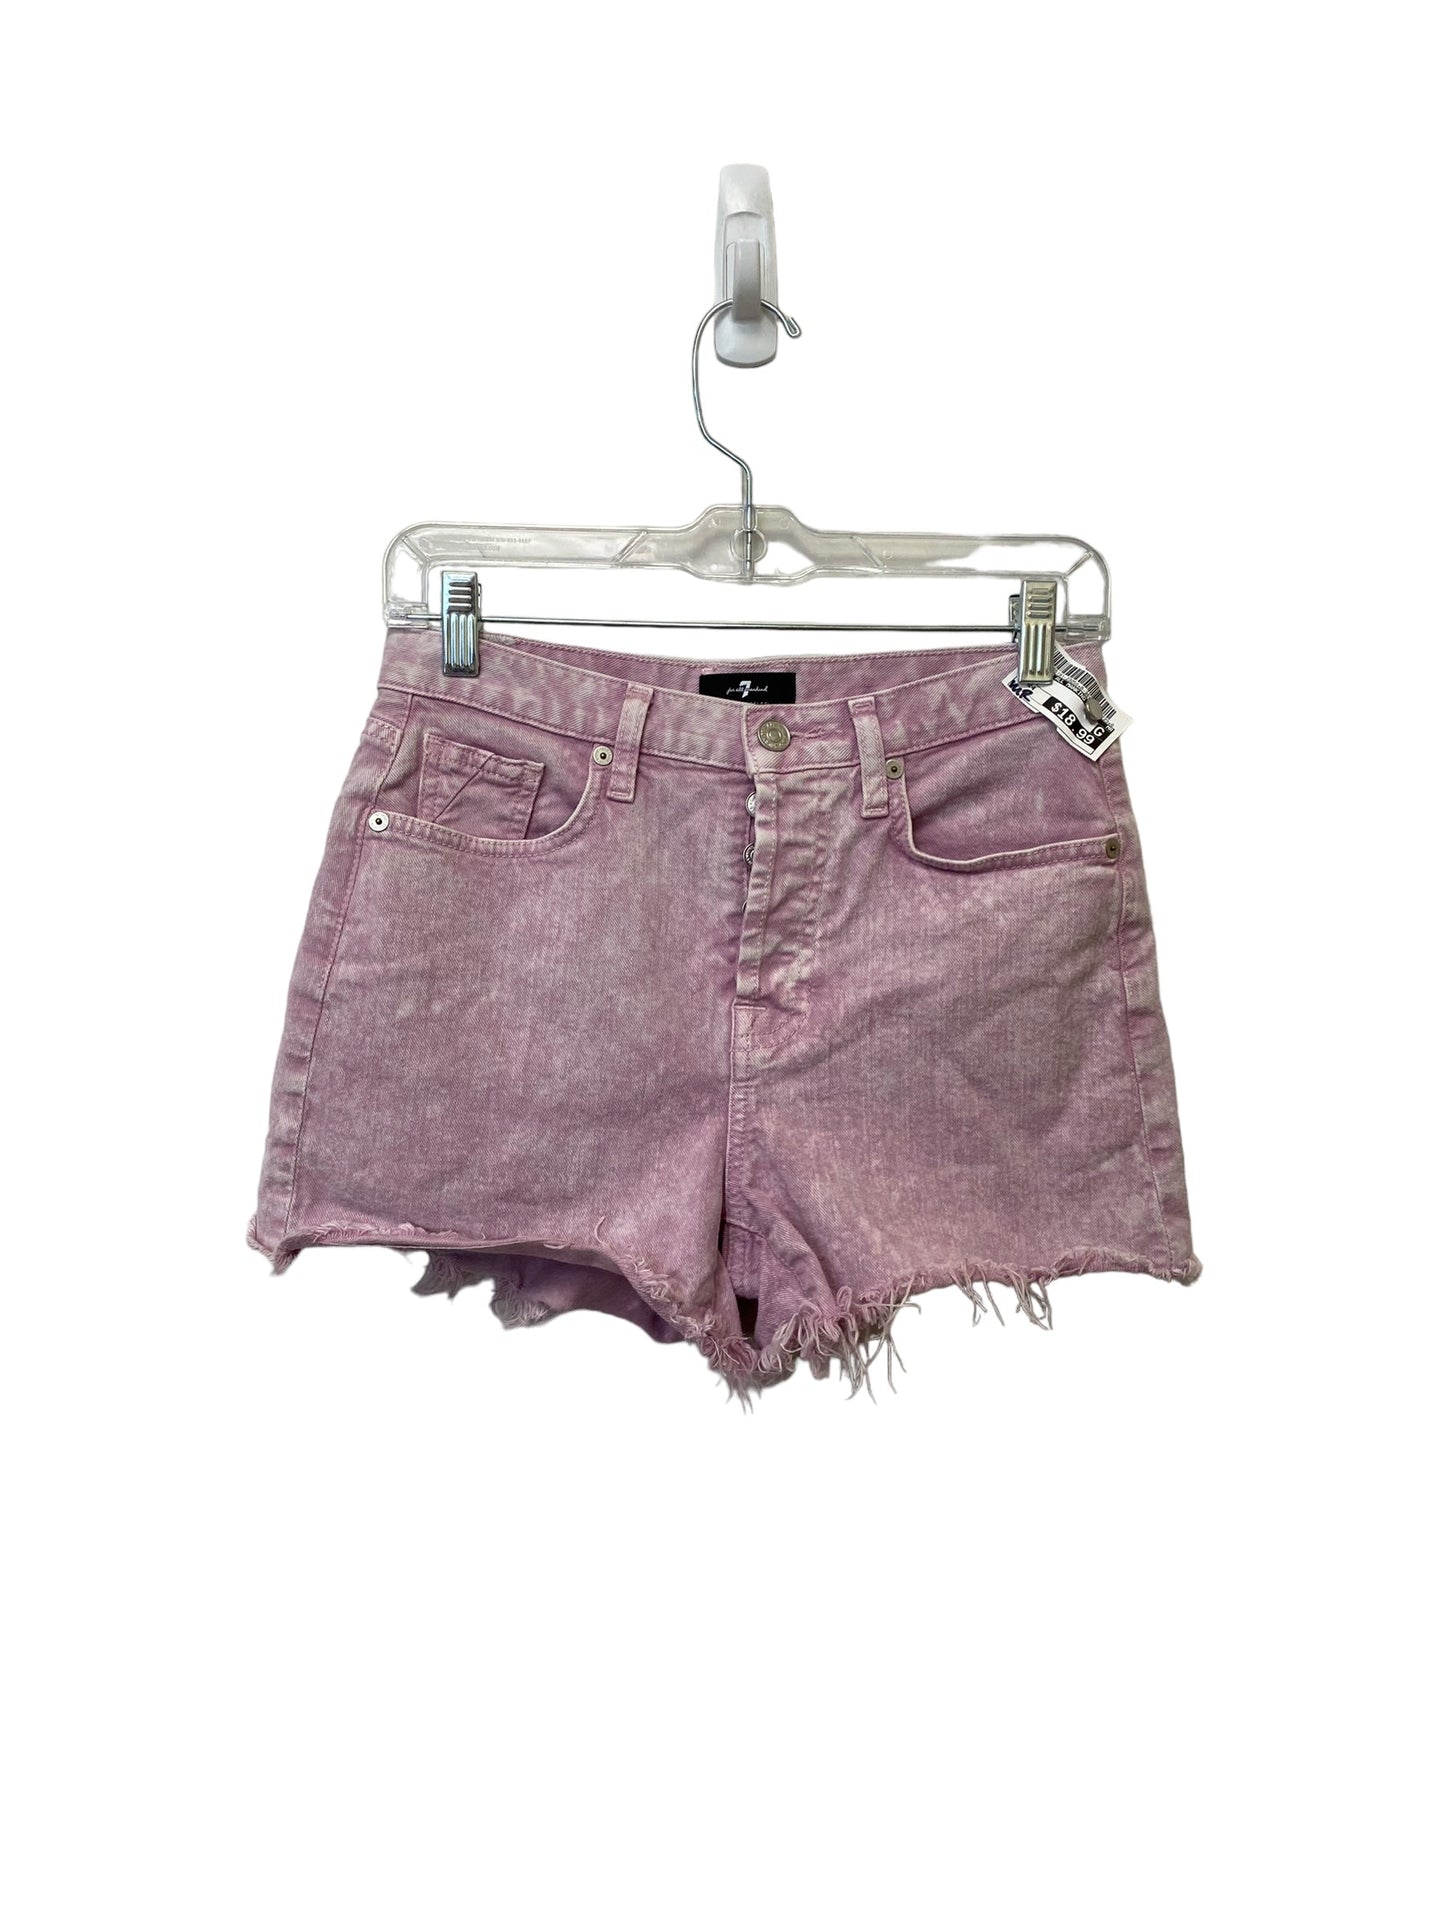 Purple Shorts 7 For All Mankind, Size 24